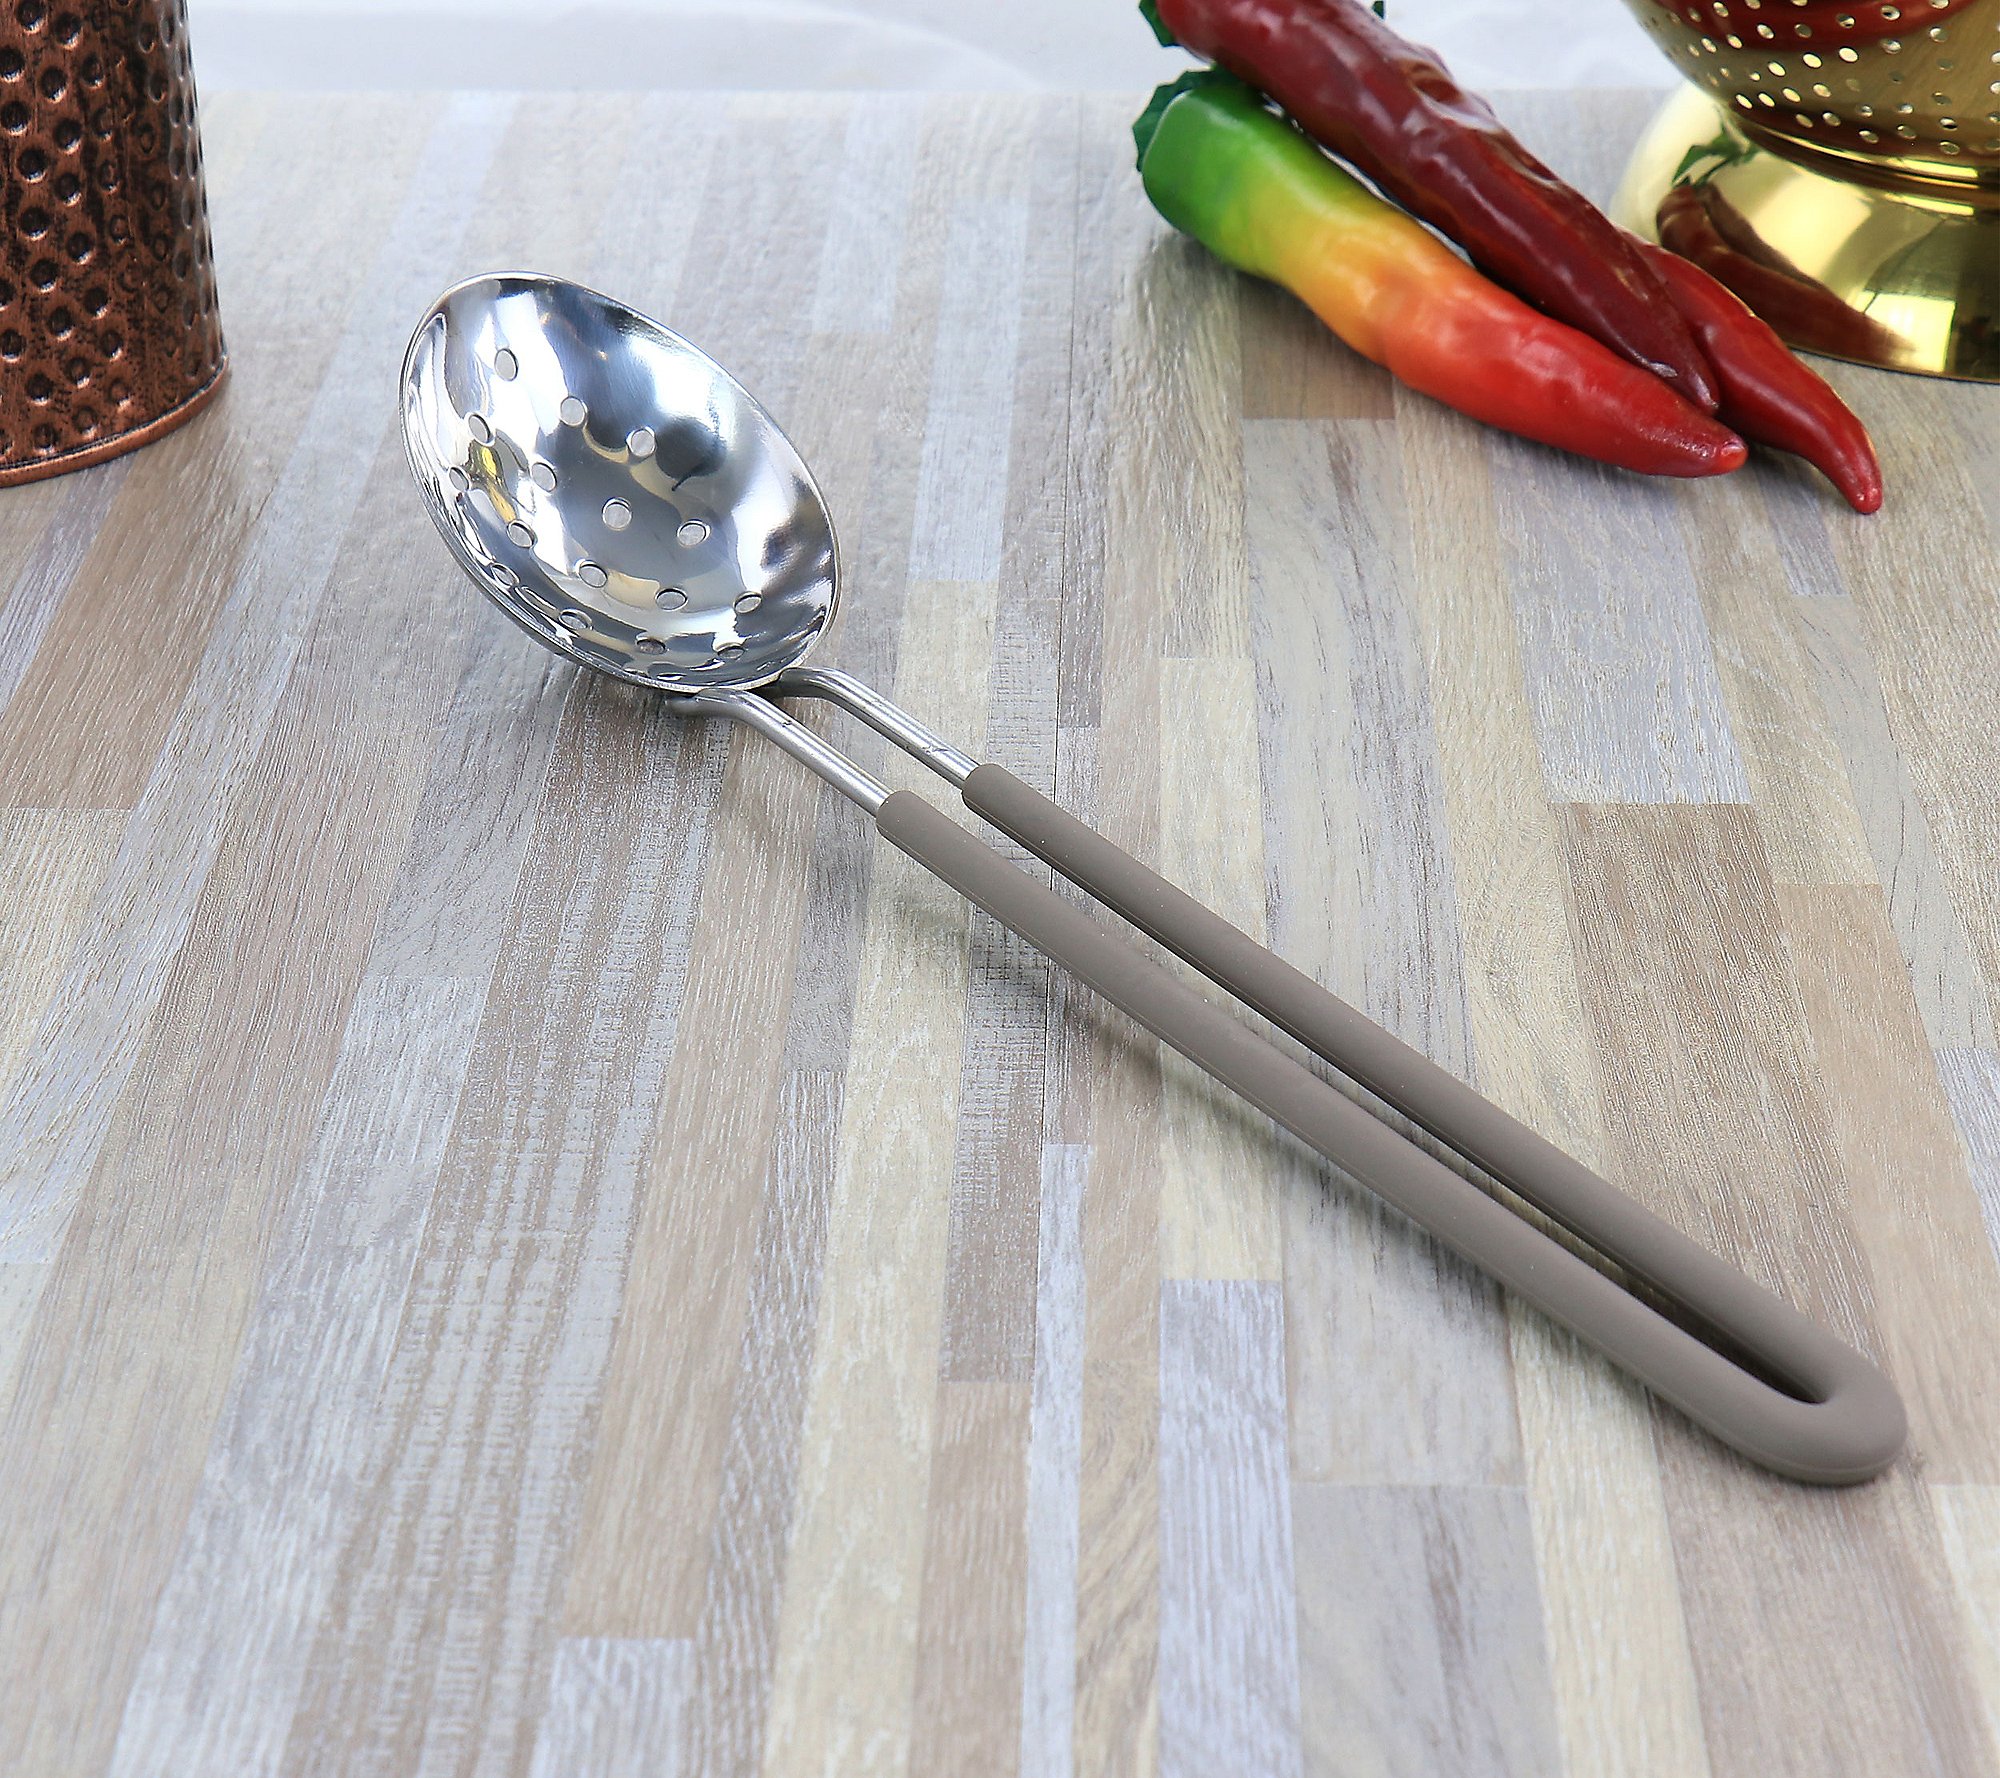 Martha Stewart Stainless Steel Slotted Spoon wi th Thin Handle